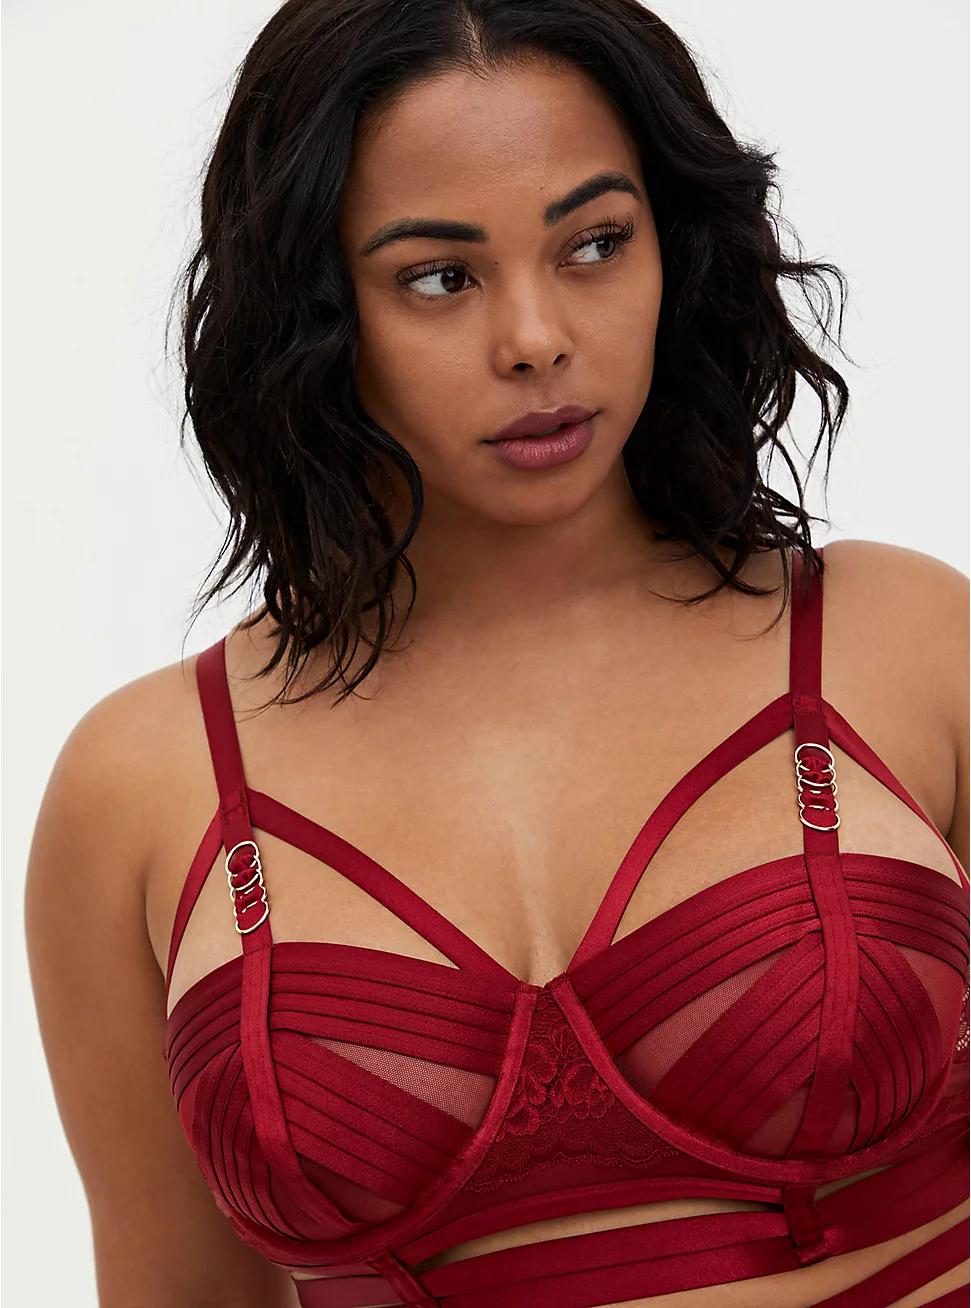 https://d17dh3qz5tugbu.cloudfront.net/production/products/images/1104638/original/dark-red-lace-cage-underwire-longline-bralette.jpg?1611230555